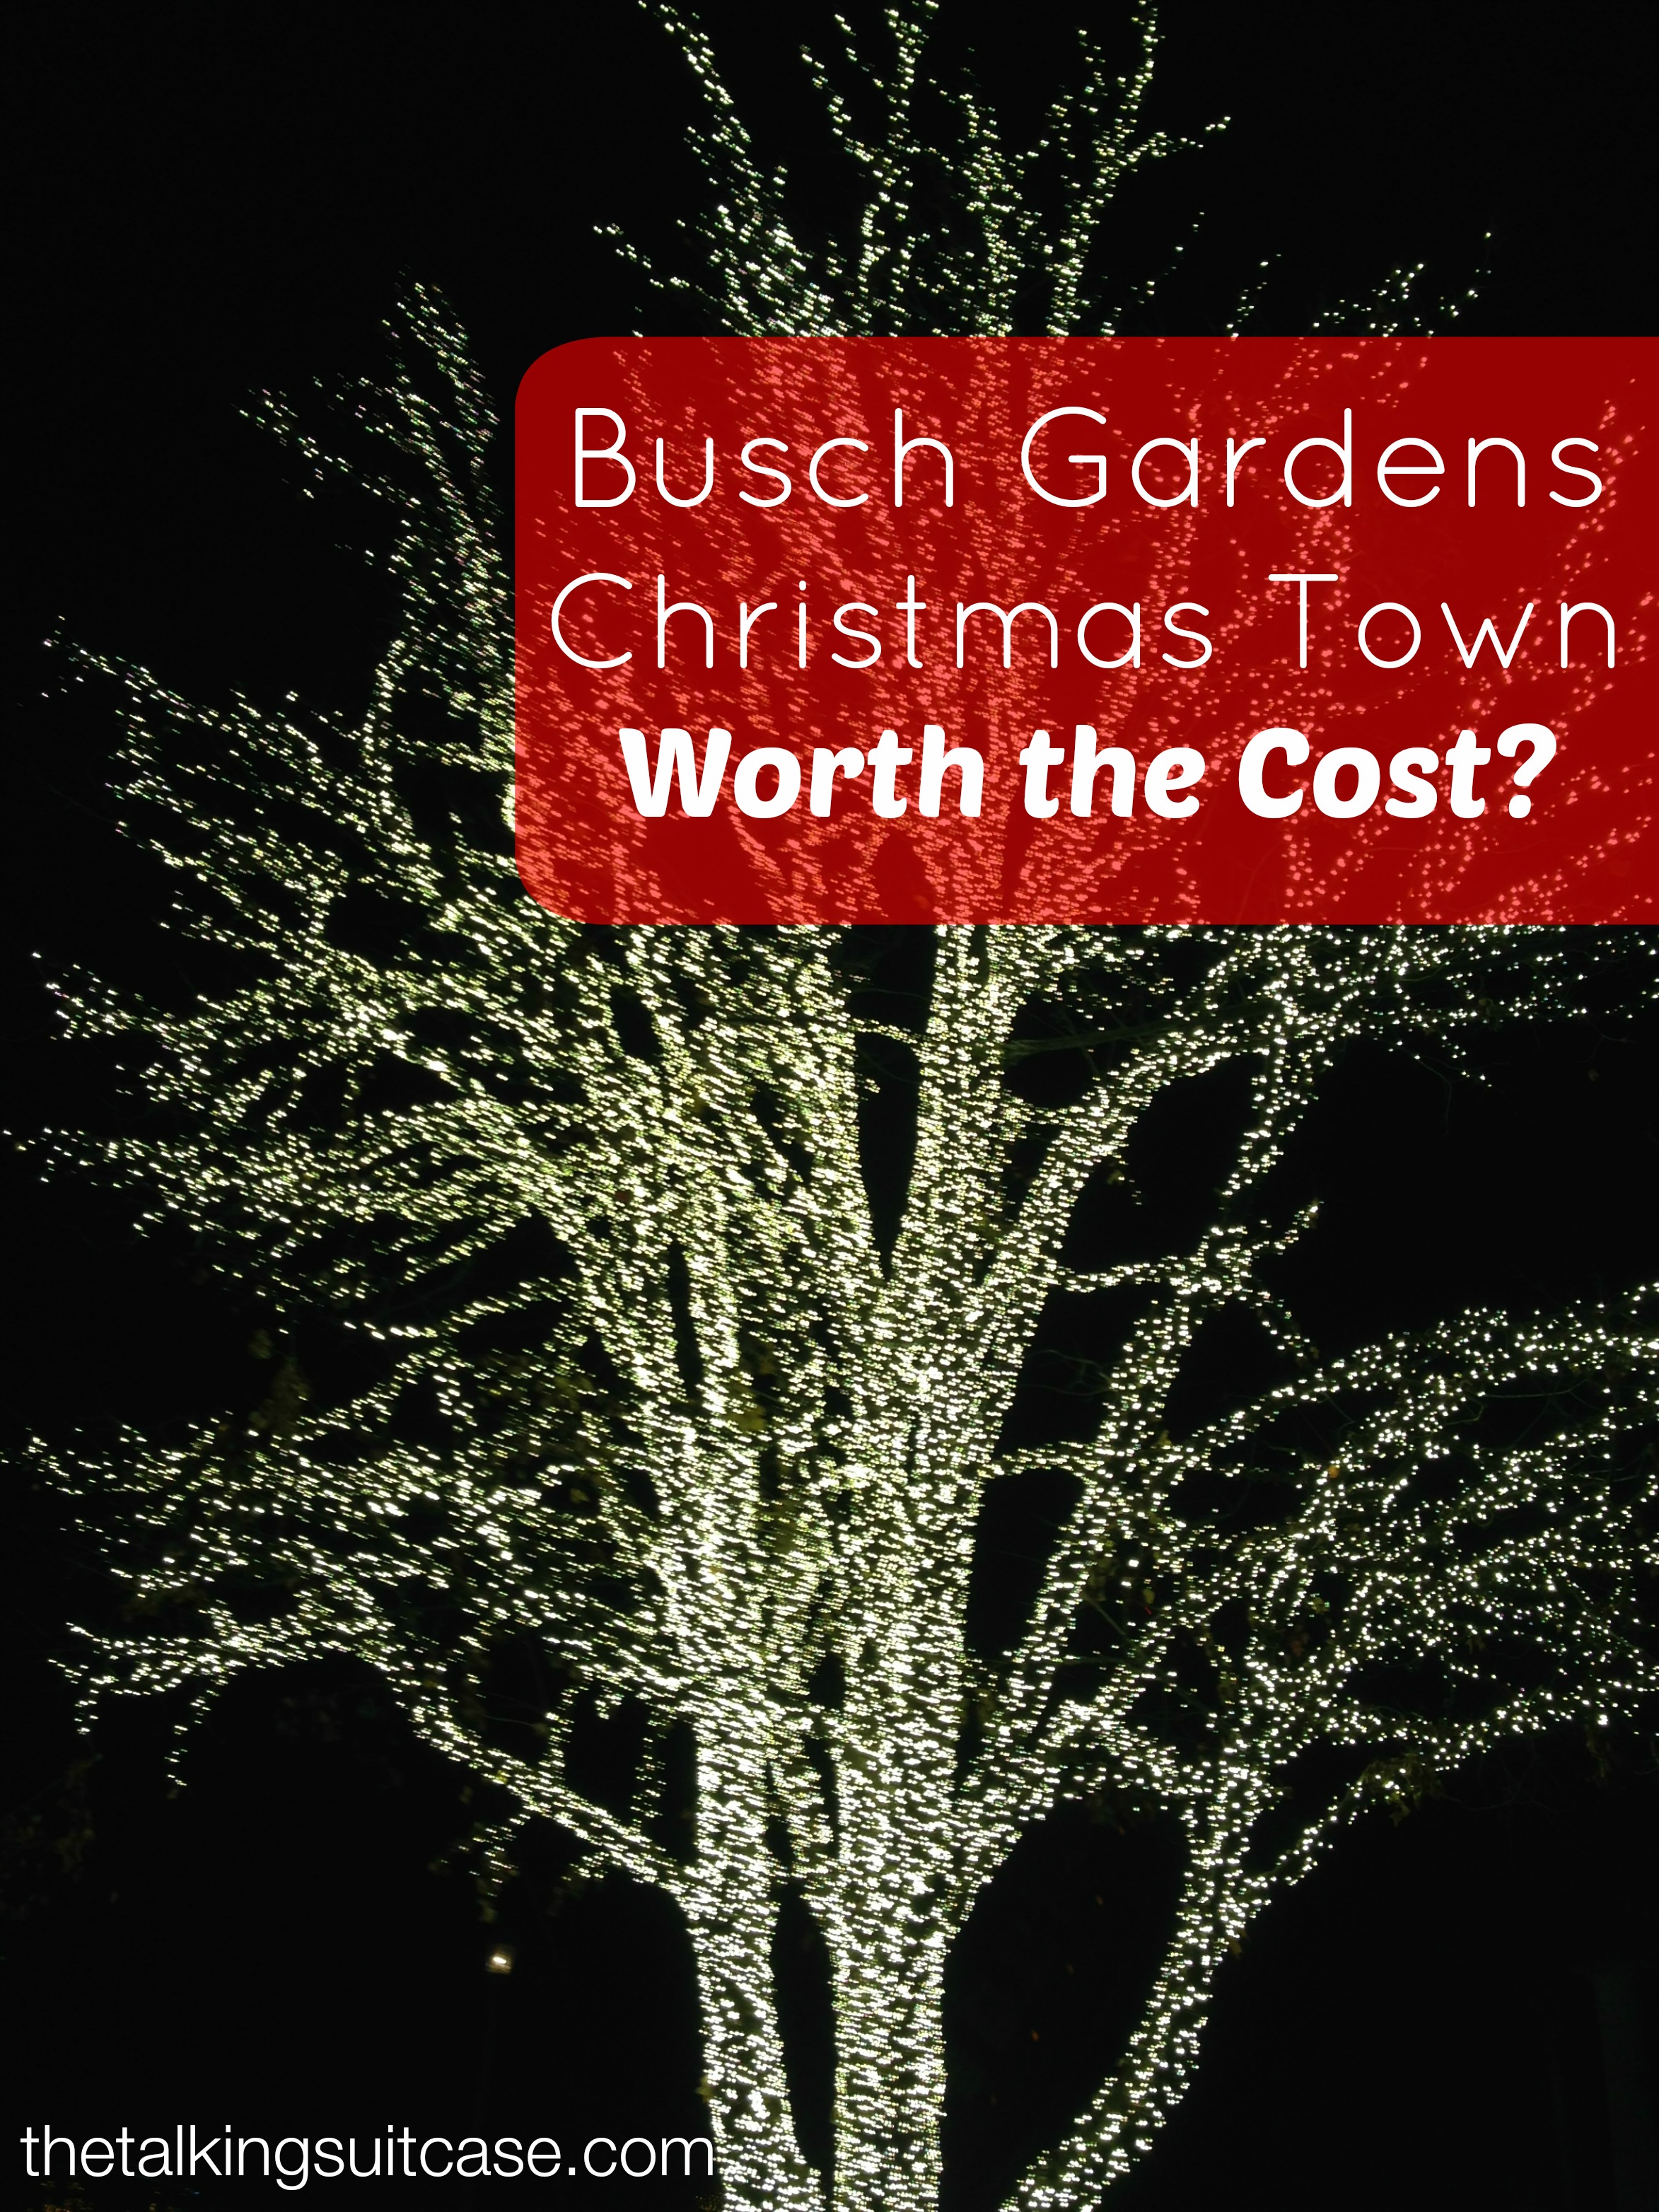 Is Busch Gardens Christmas Town Worth The Cost